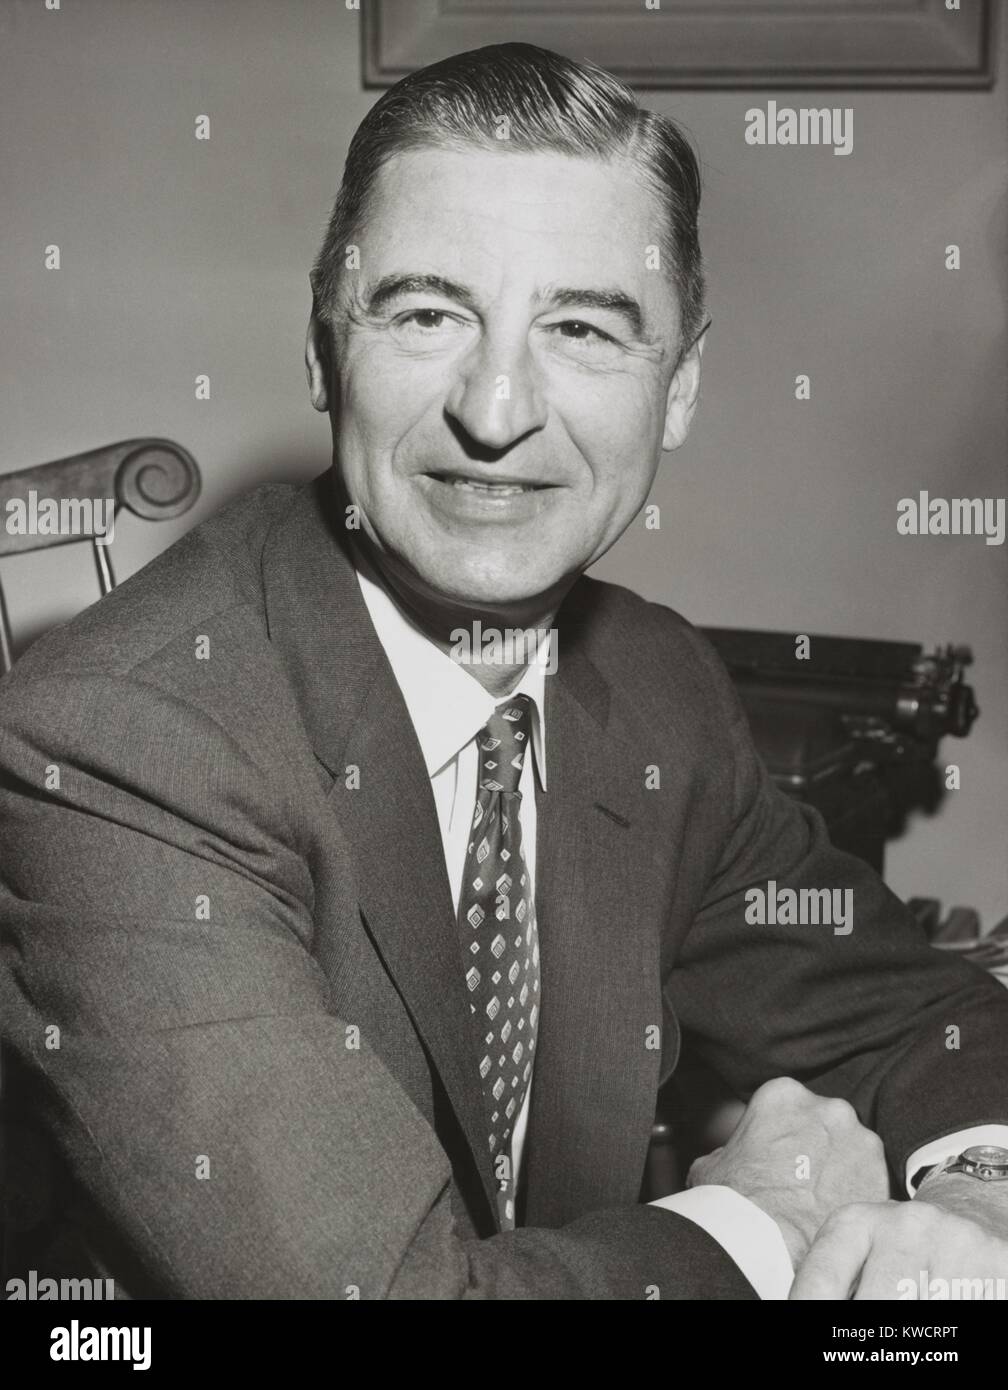 Children's author and illustrator, Ted Geisel, better known by his pseudonym, Dr. Seuss. April 4, 1957 - (BSLOC 2015 1 28) Stock Photo